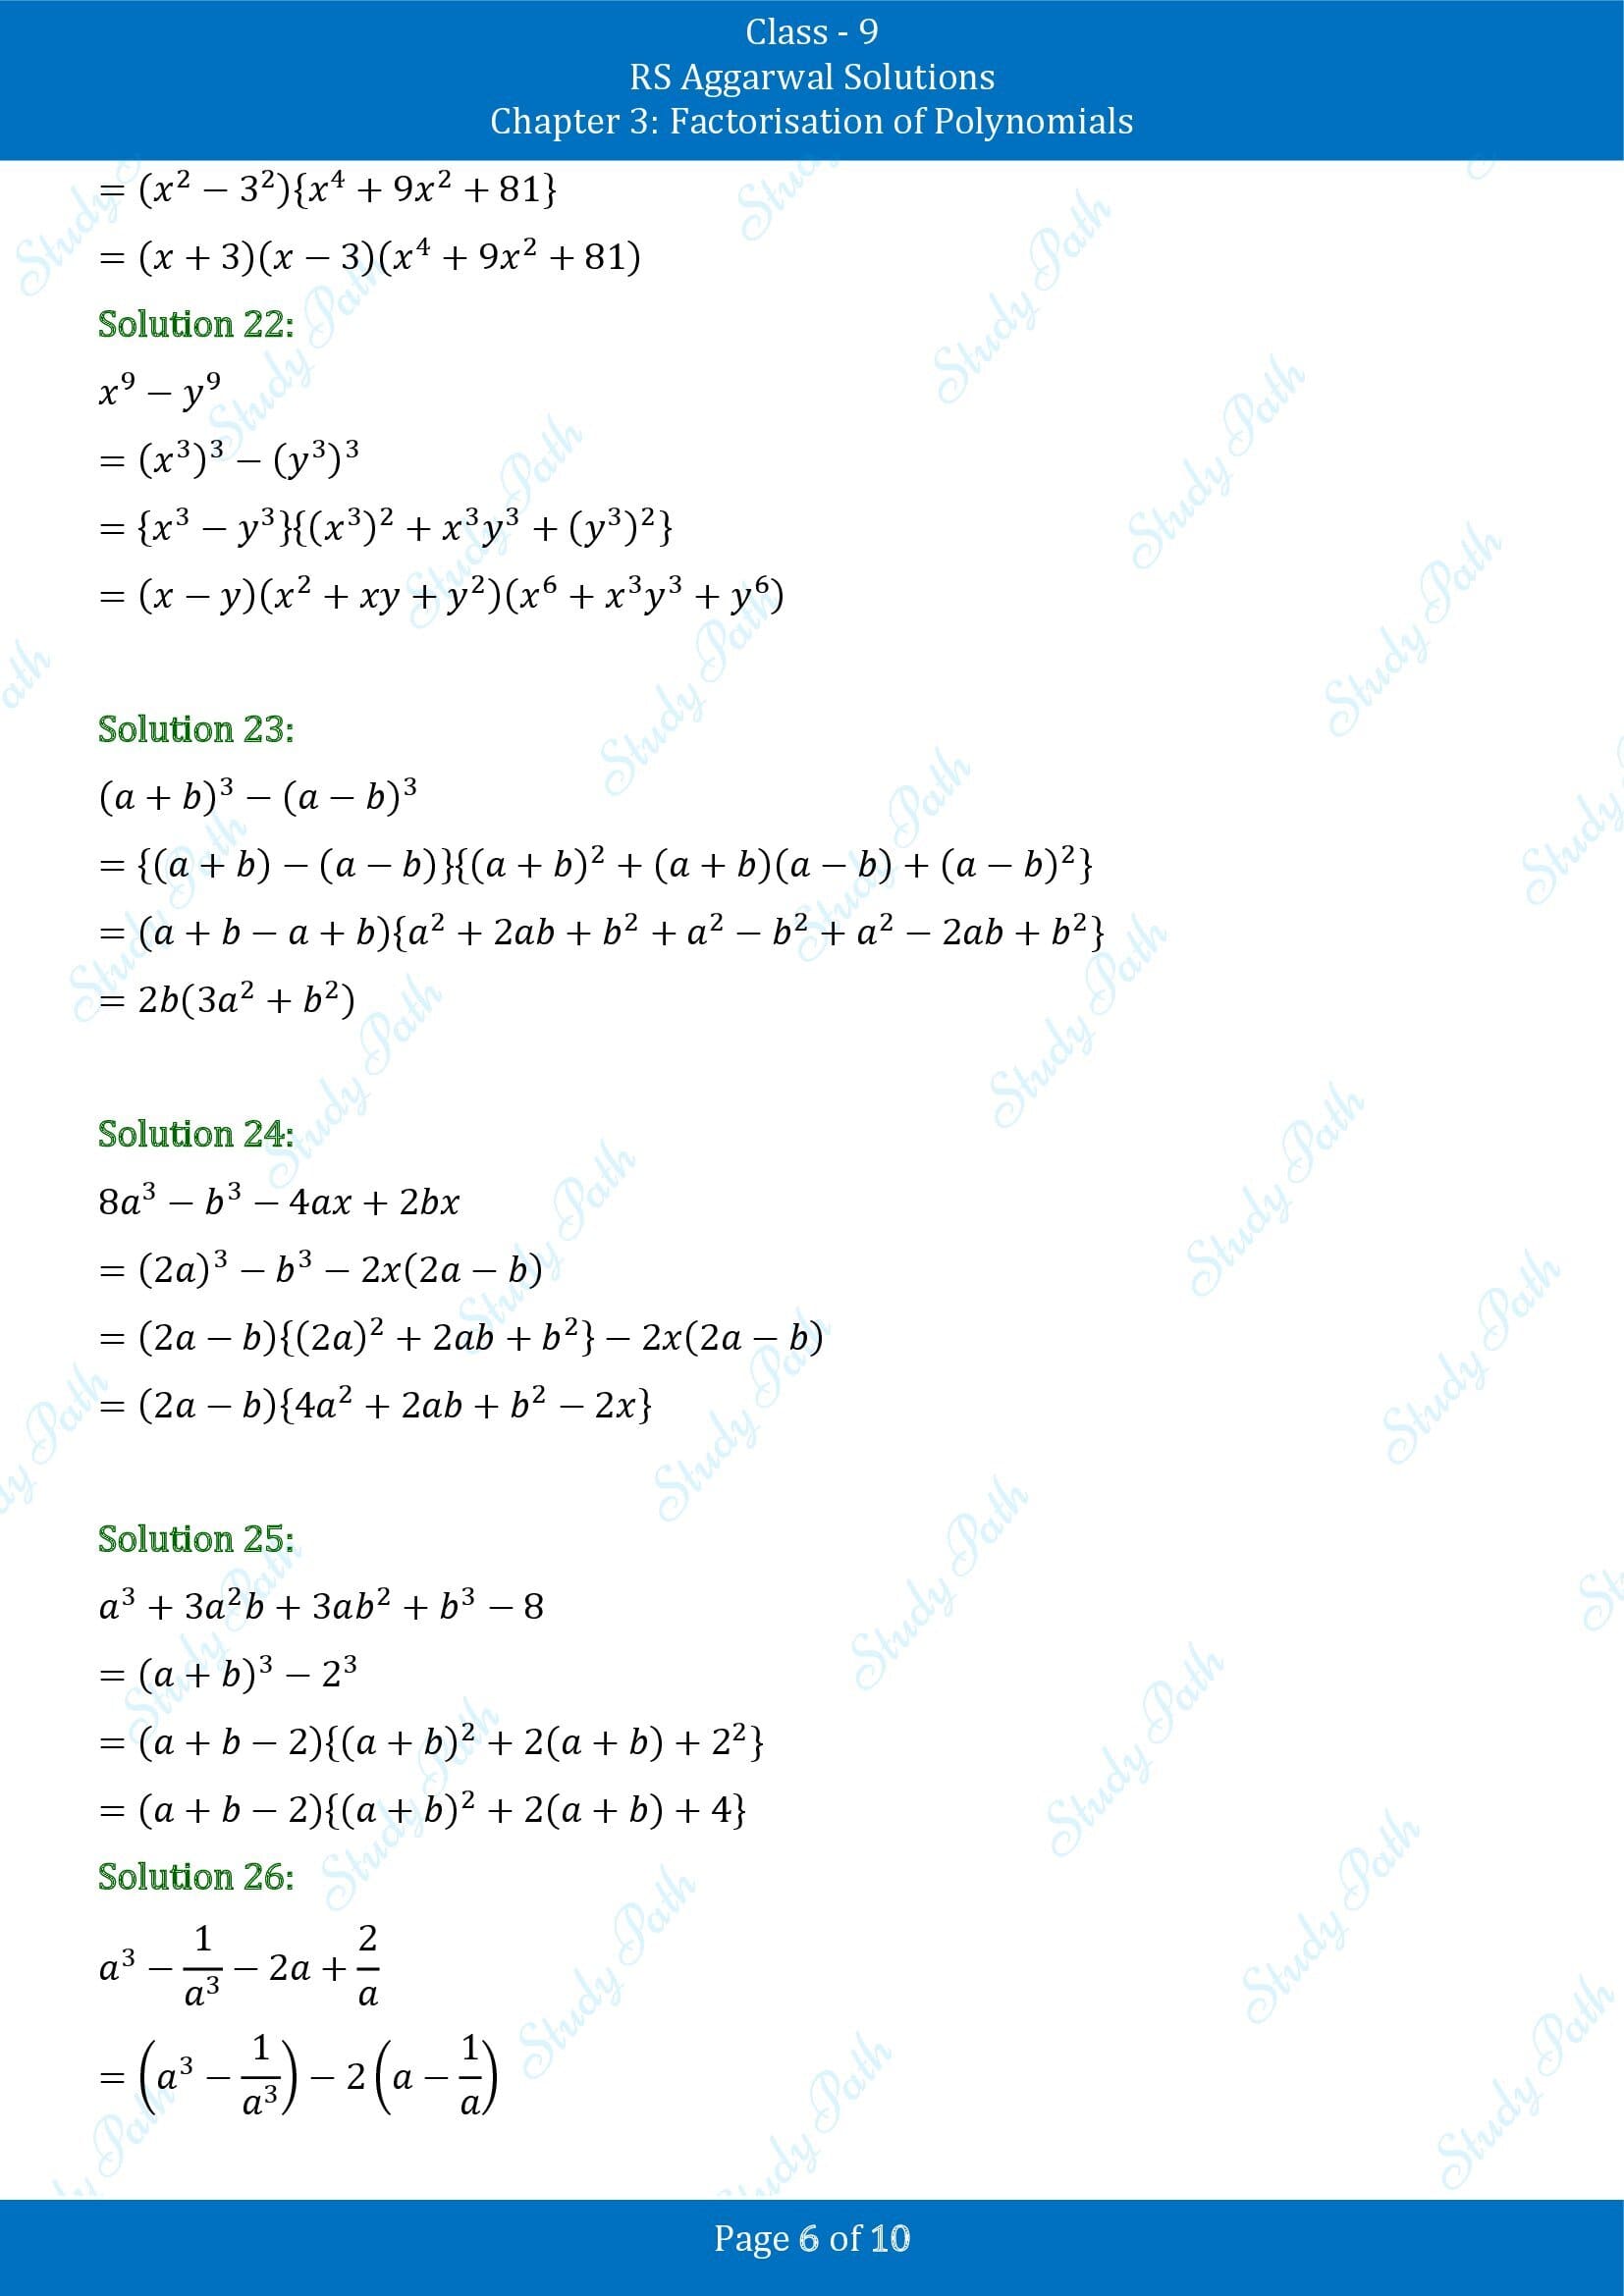 RS Aggarwal Solutions Class 9 Chapter 3 Factorisation of Polynomials Exercise 3F 00006